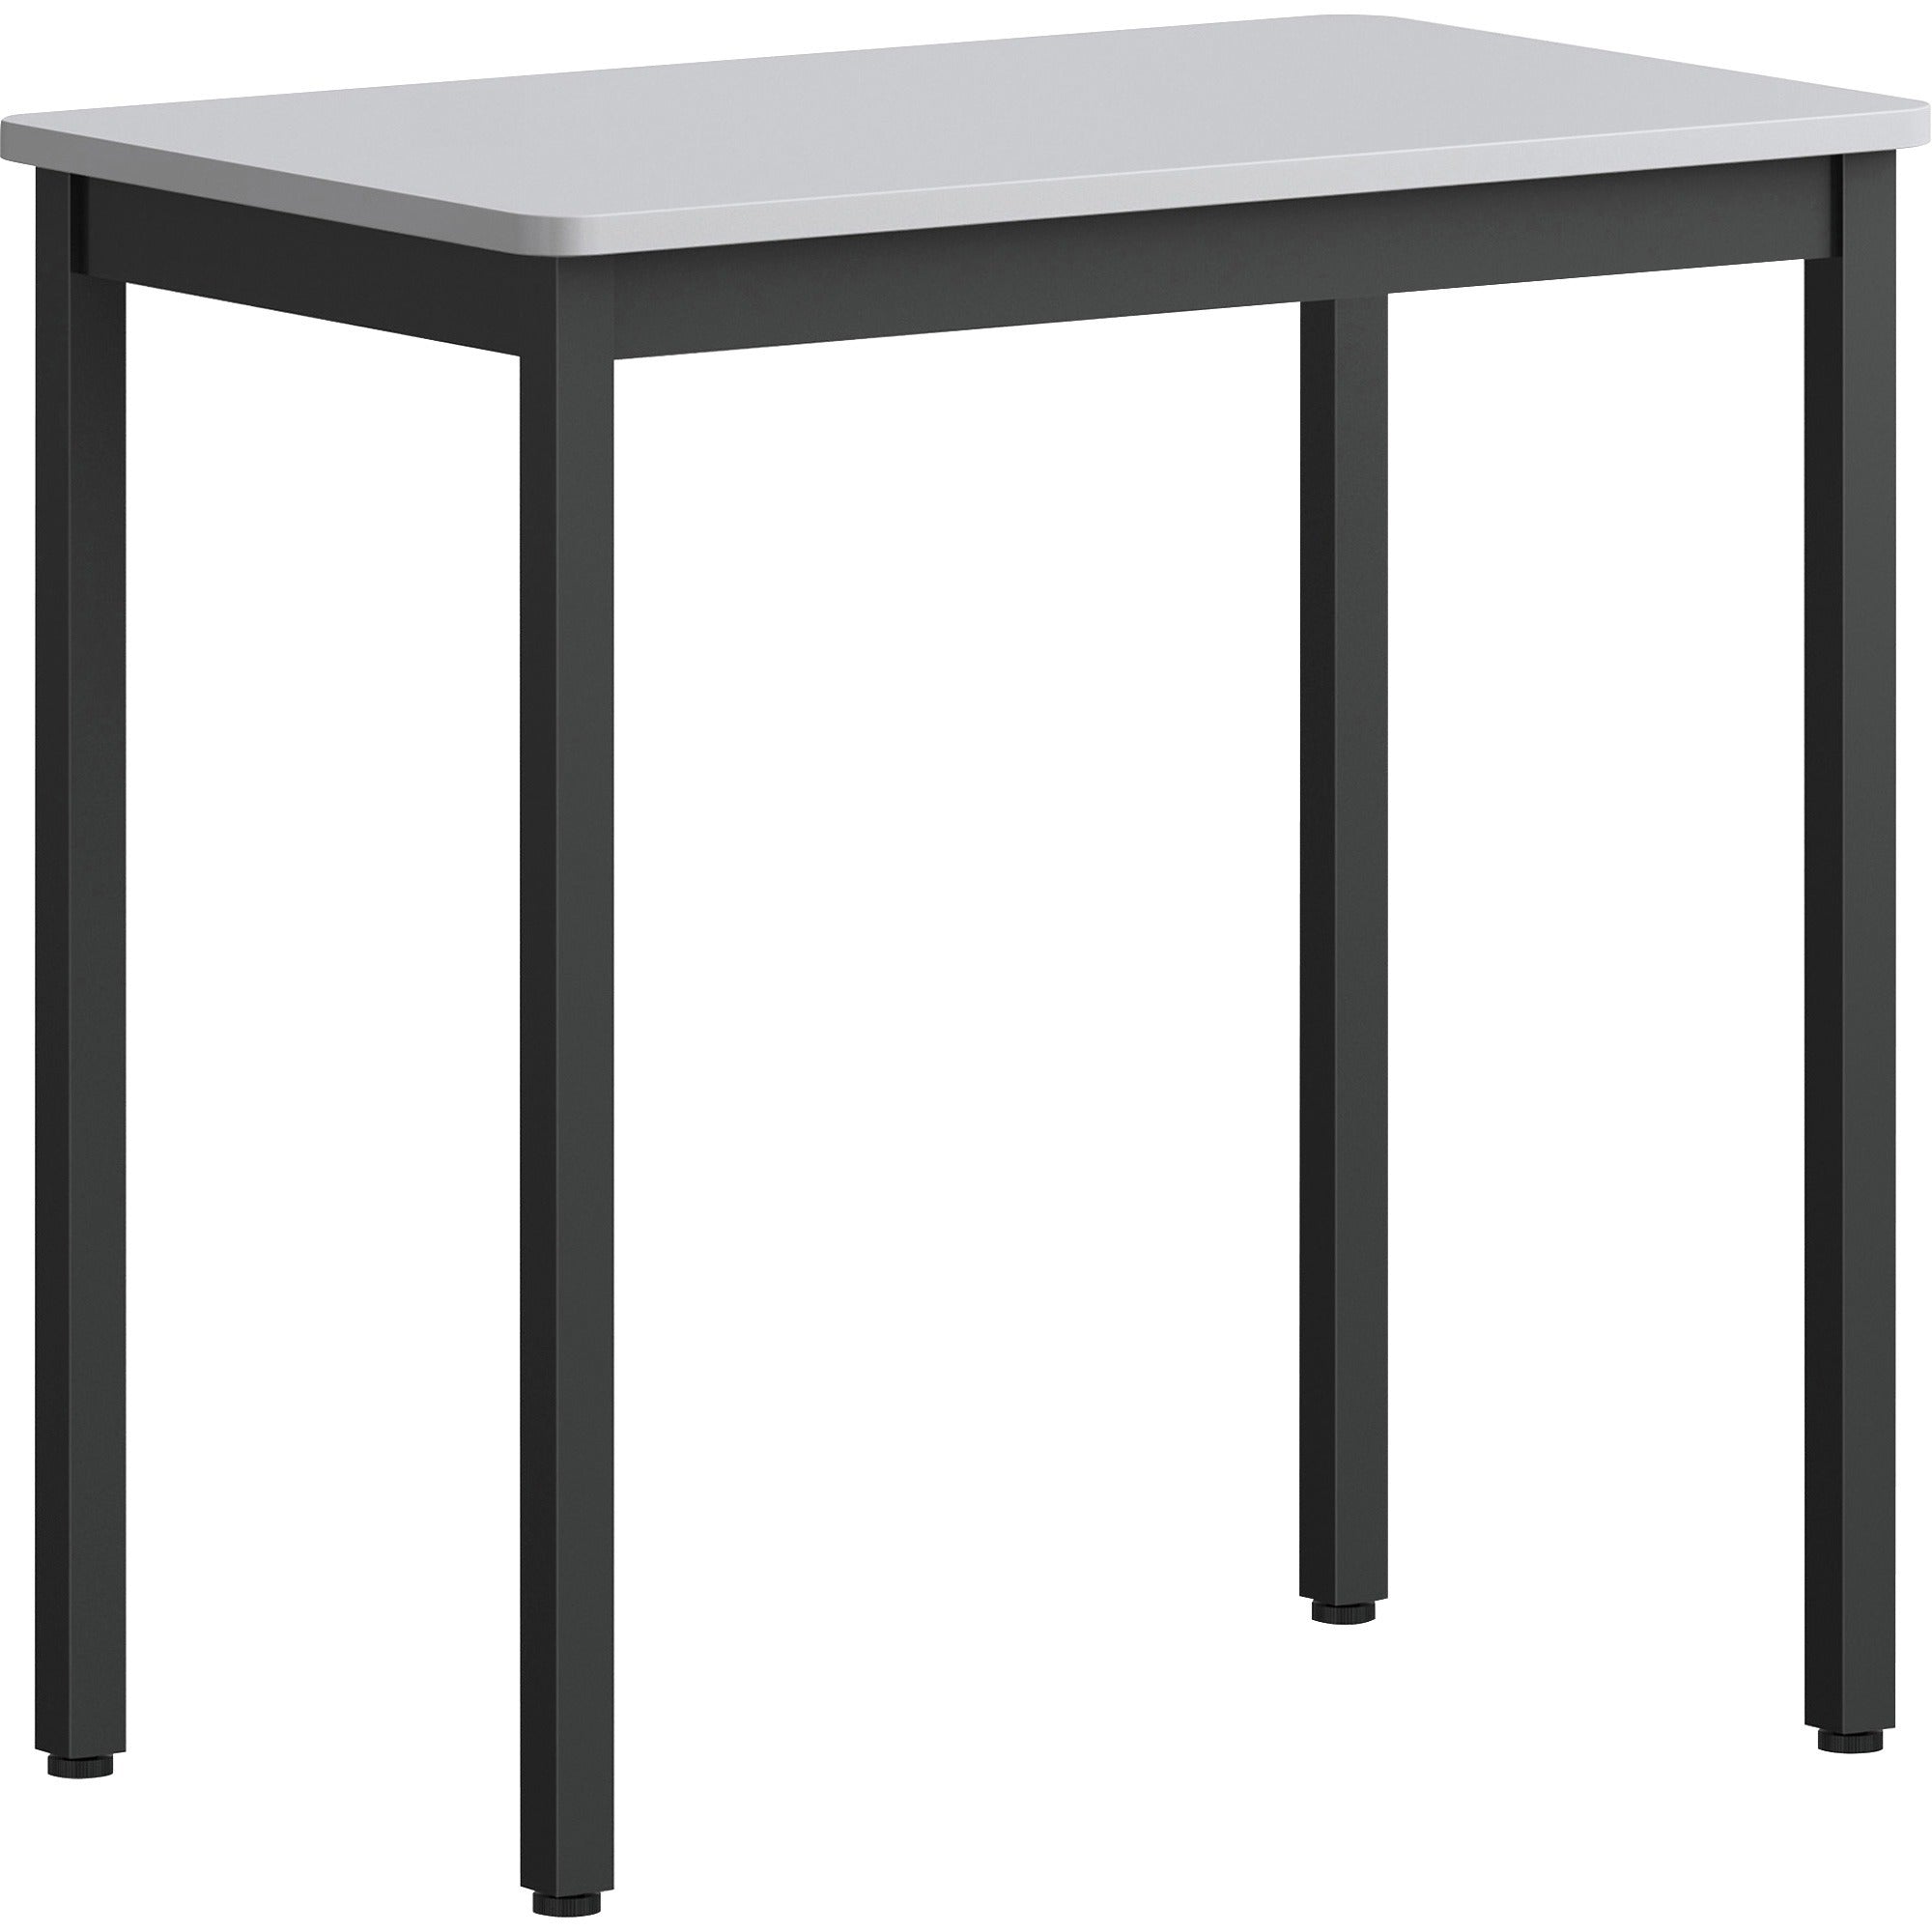 lorell-utility-table-for-table-topgray-rectangle-laminated-top-powder-coated-black-base-500-lb-capacity-x-30-table-top-width-x-1813-table-top-depth-30-height-assembly-required-melamine-top-material-1-each_llr60752 - 1